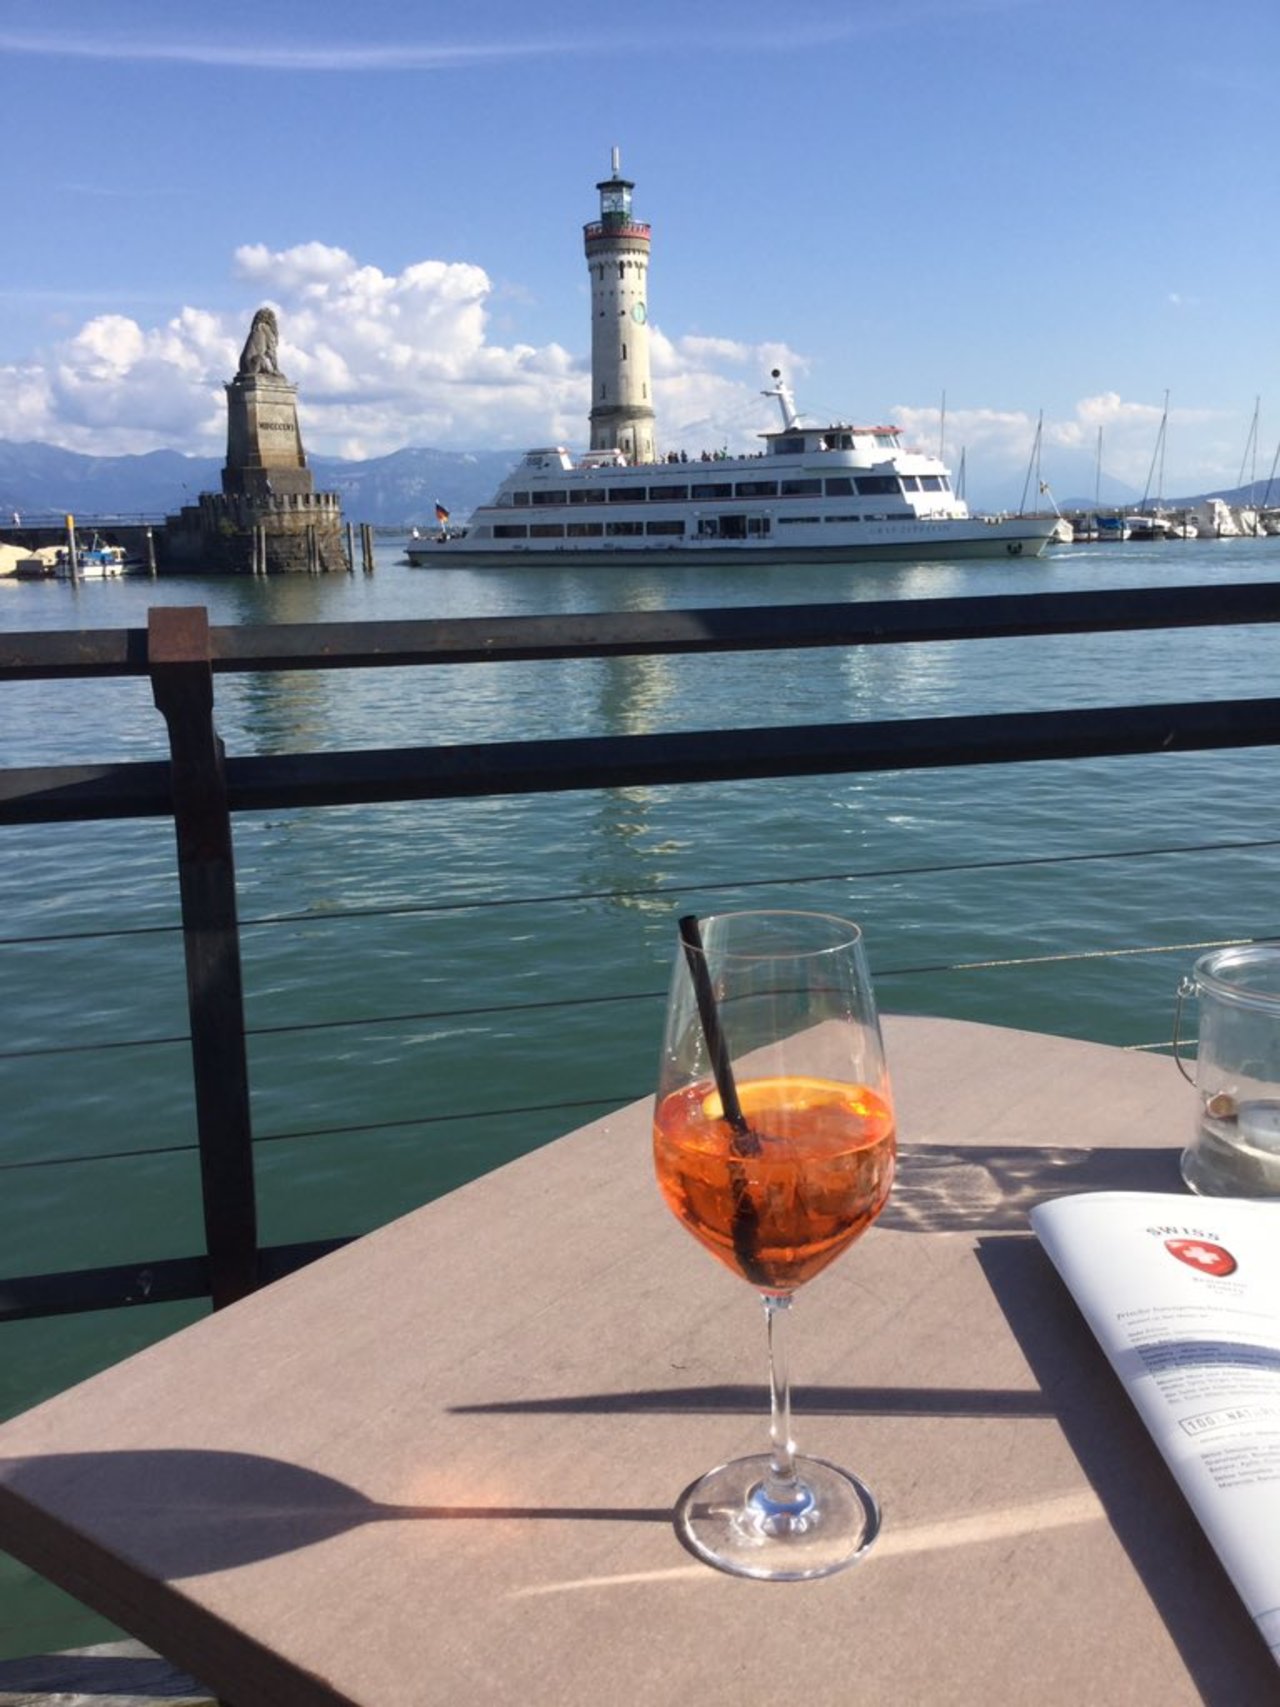 Made it down to Lindau on Lake Constance. Stunning place. View of the Alps; warm weather; Aperol Spritz aplenty. #MondayInspiration #lindau https://t.co/IcMexq9cW0